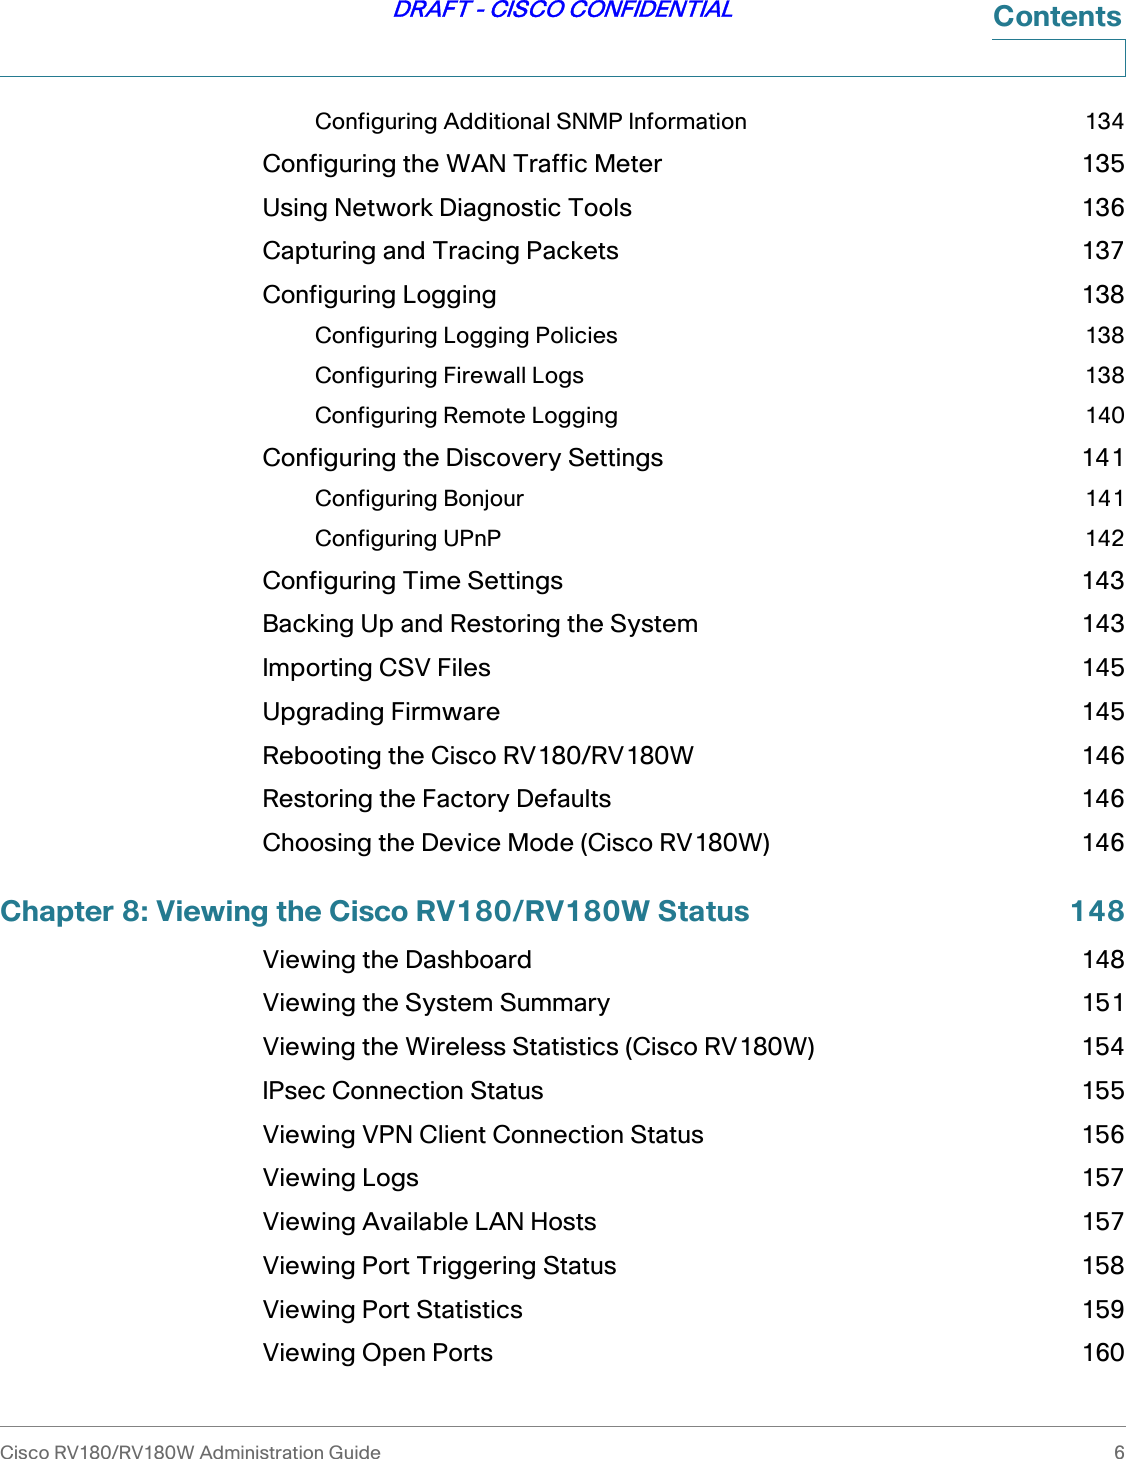 Cisco RV180/RV180W Administration Guide 6DRAFT - CISCO CONFIDENTIALContentsConfiguring Additional SNMP Information 134Configuring the WAN Traffic Meter 135Using Network Diagnostic Tools 136Capturing and Tracing Packets 137Configuring Logging 138Configuring Logging Policies 138Configuring Firewall Logs 138Configuring Remote Logging 140Configuring the Discovery Settings 141Configuring Bonjour 141Configuring UPnP 142Configuring Time Settings 143Backing Up and Restoring the System 143Importing CSV Files 145Upgrading Firmware 145Rebooting the Cisco RV180/RV180W 146Restoring the Factory Defaults 146Choosing the Device Mode (Cisco RV180W) 146Chapter 8: Viewing the Cisco RV180/RV180W Status 148Viewing the Dashboard 148Viewing the System Summary 151Viewing the Wireless Statistics (Cisco RV180W) 154IPsec Connection Status 155Viewing VPN Client Connection Status 156Viewing Logs 157Viewing Available LAN Hosts 157Viewing Port Triggering Status 158Viewing Port Statistics 159Viewing Open Ports 160